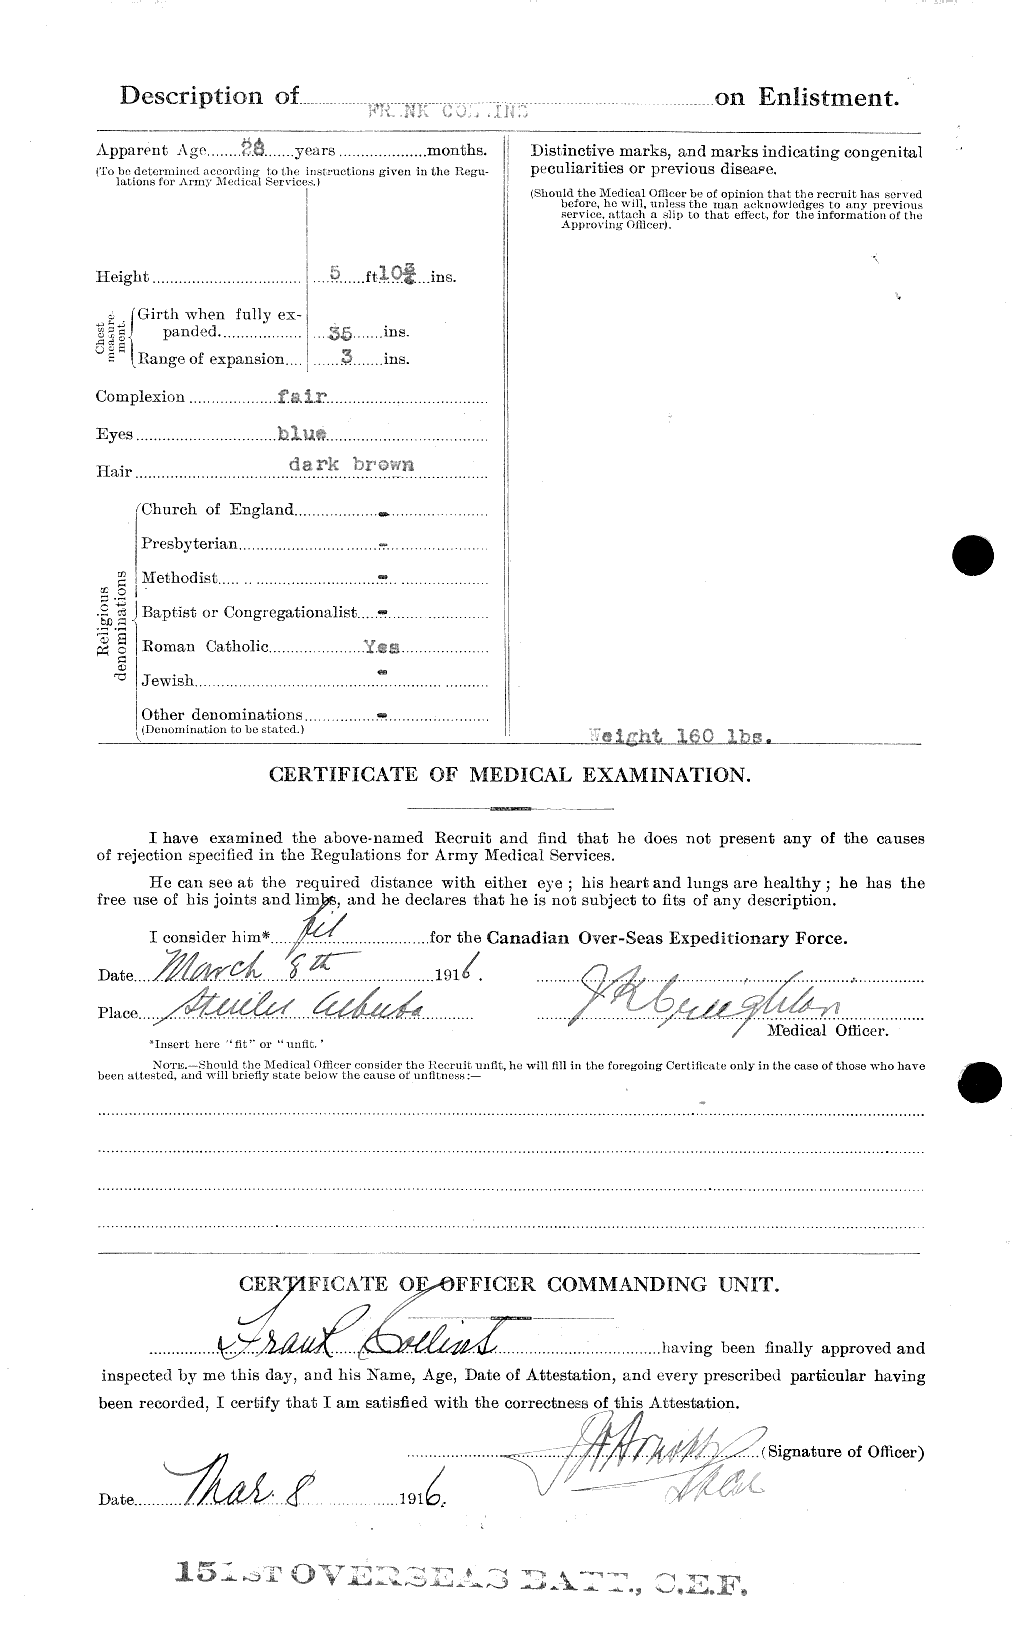 Personnel Records of the First World War - CEF 037790b